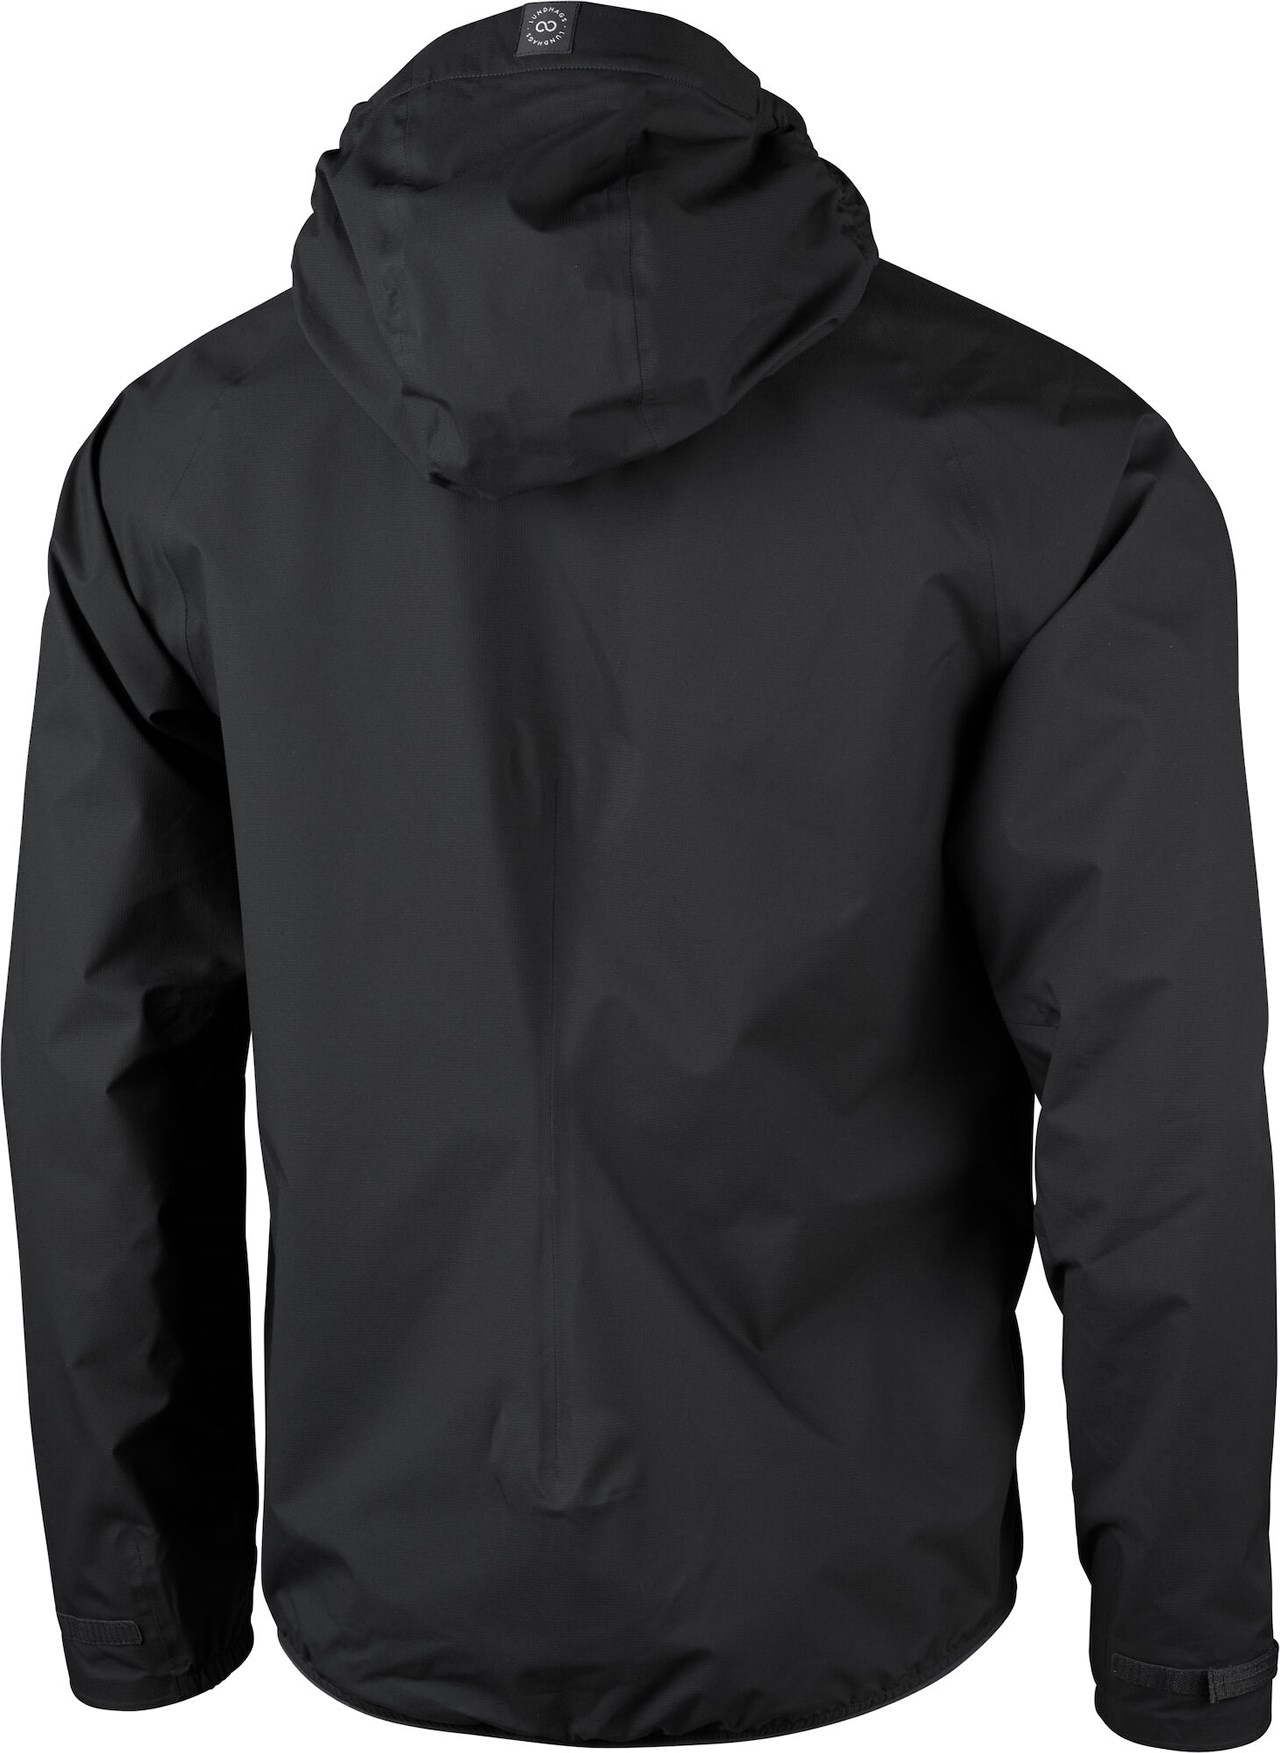 Lundhags "Lo Ms Jacket" - charcoal